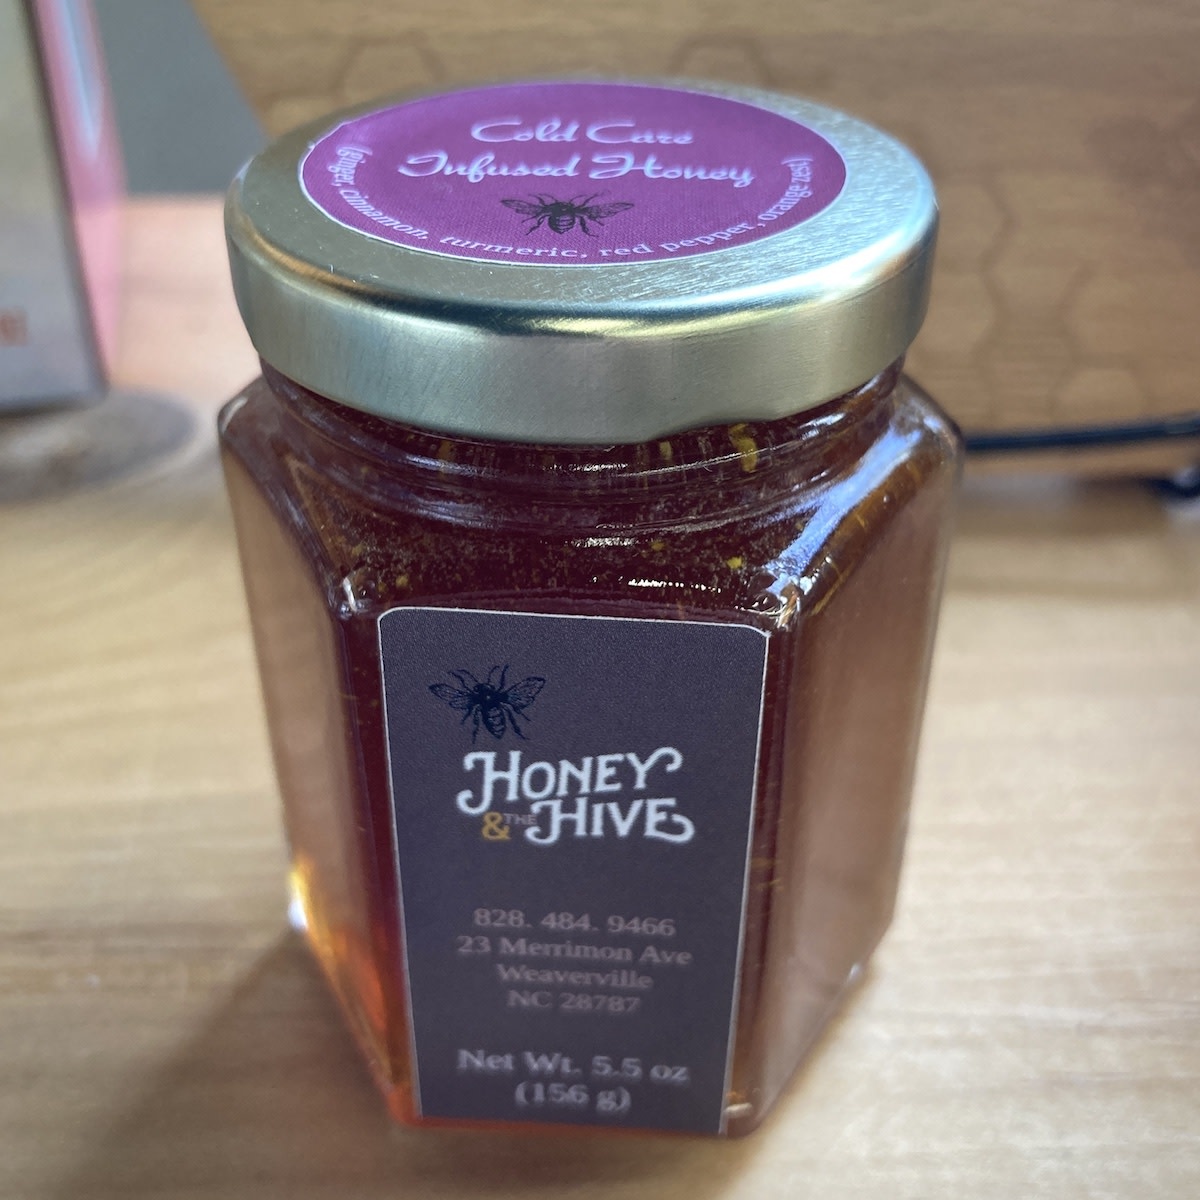 Honey & the Hive H+H Infused Honey, Cold Care